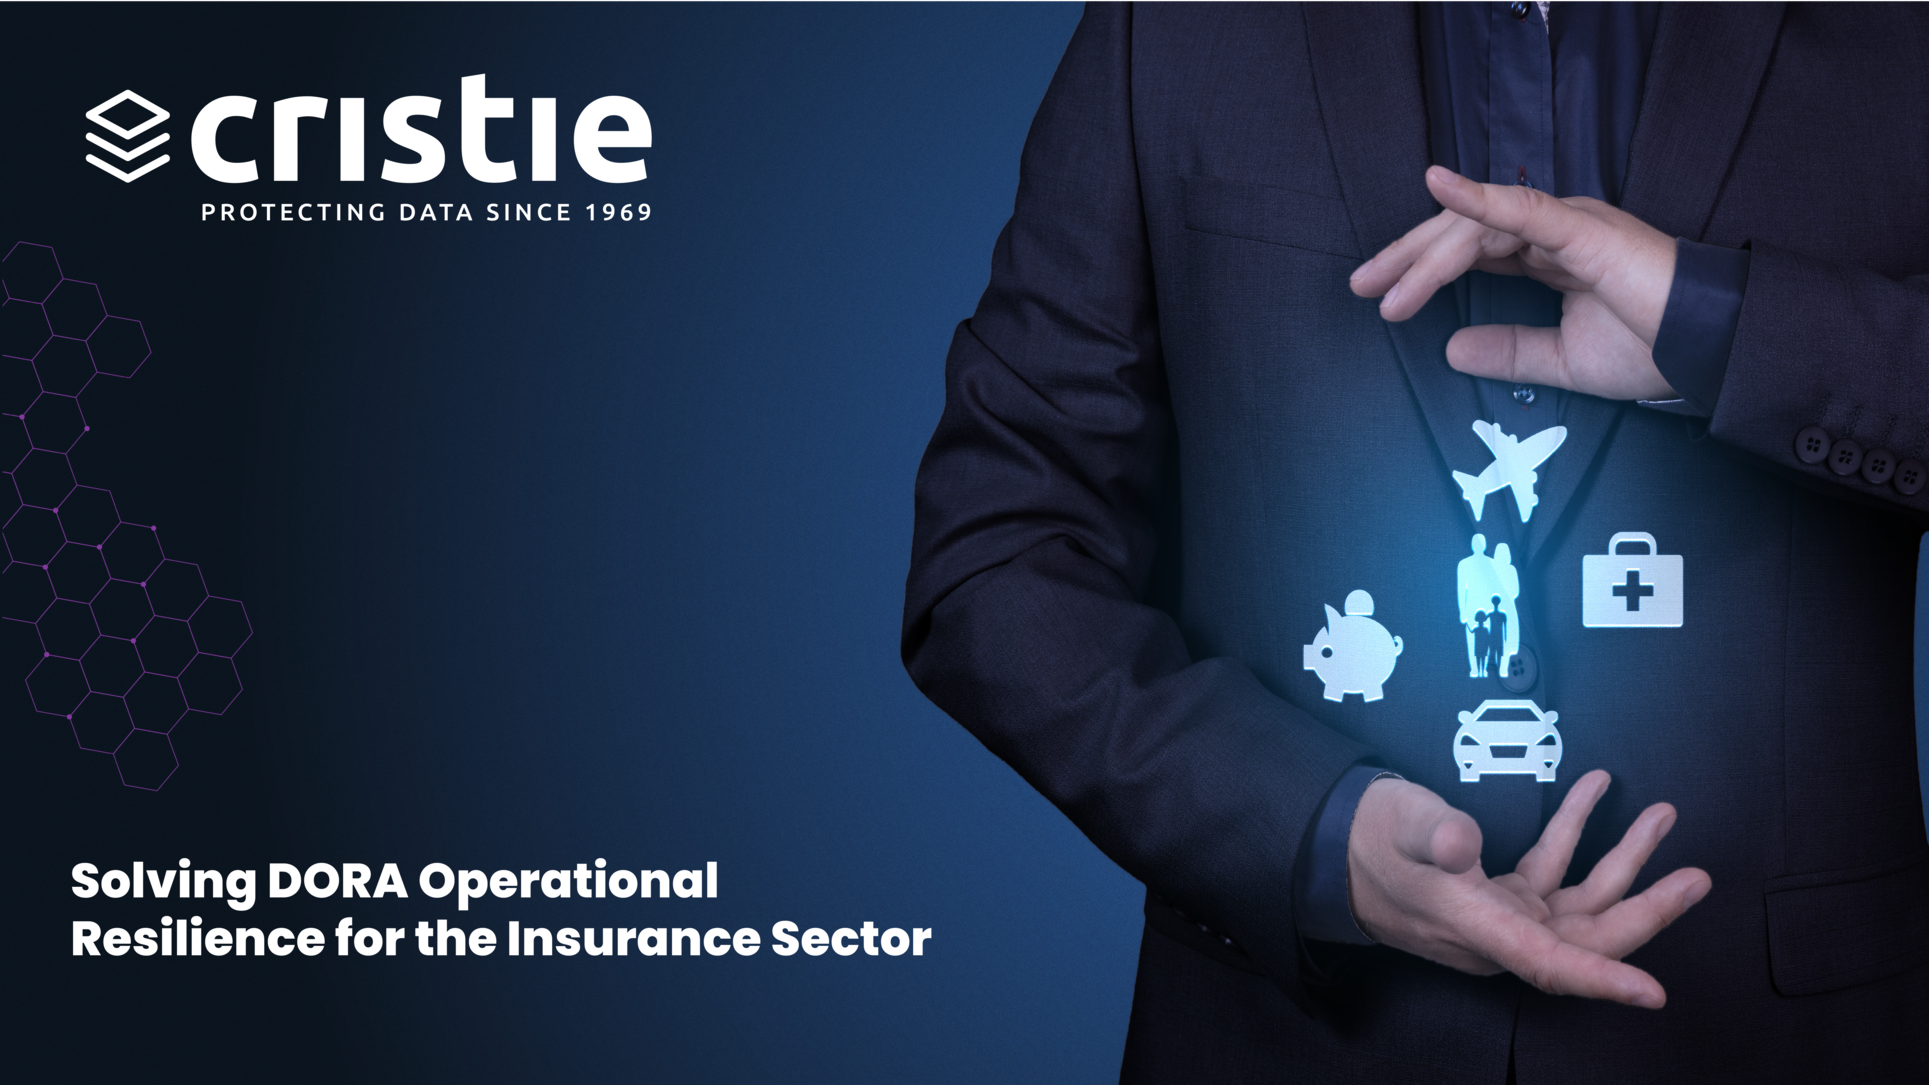 Cristie Data – Solving DORA Operational Resilience challenges for the Insurance Sector.